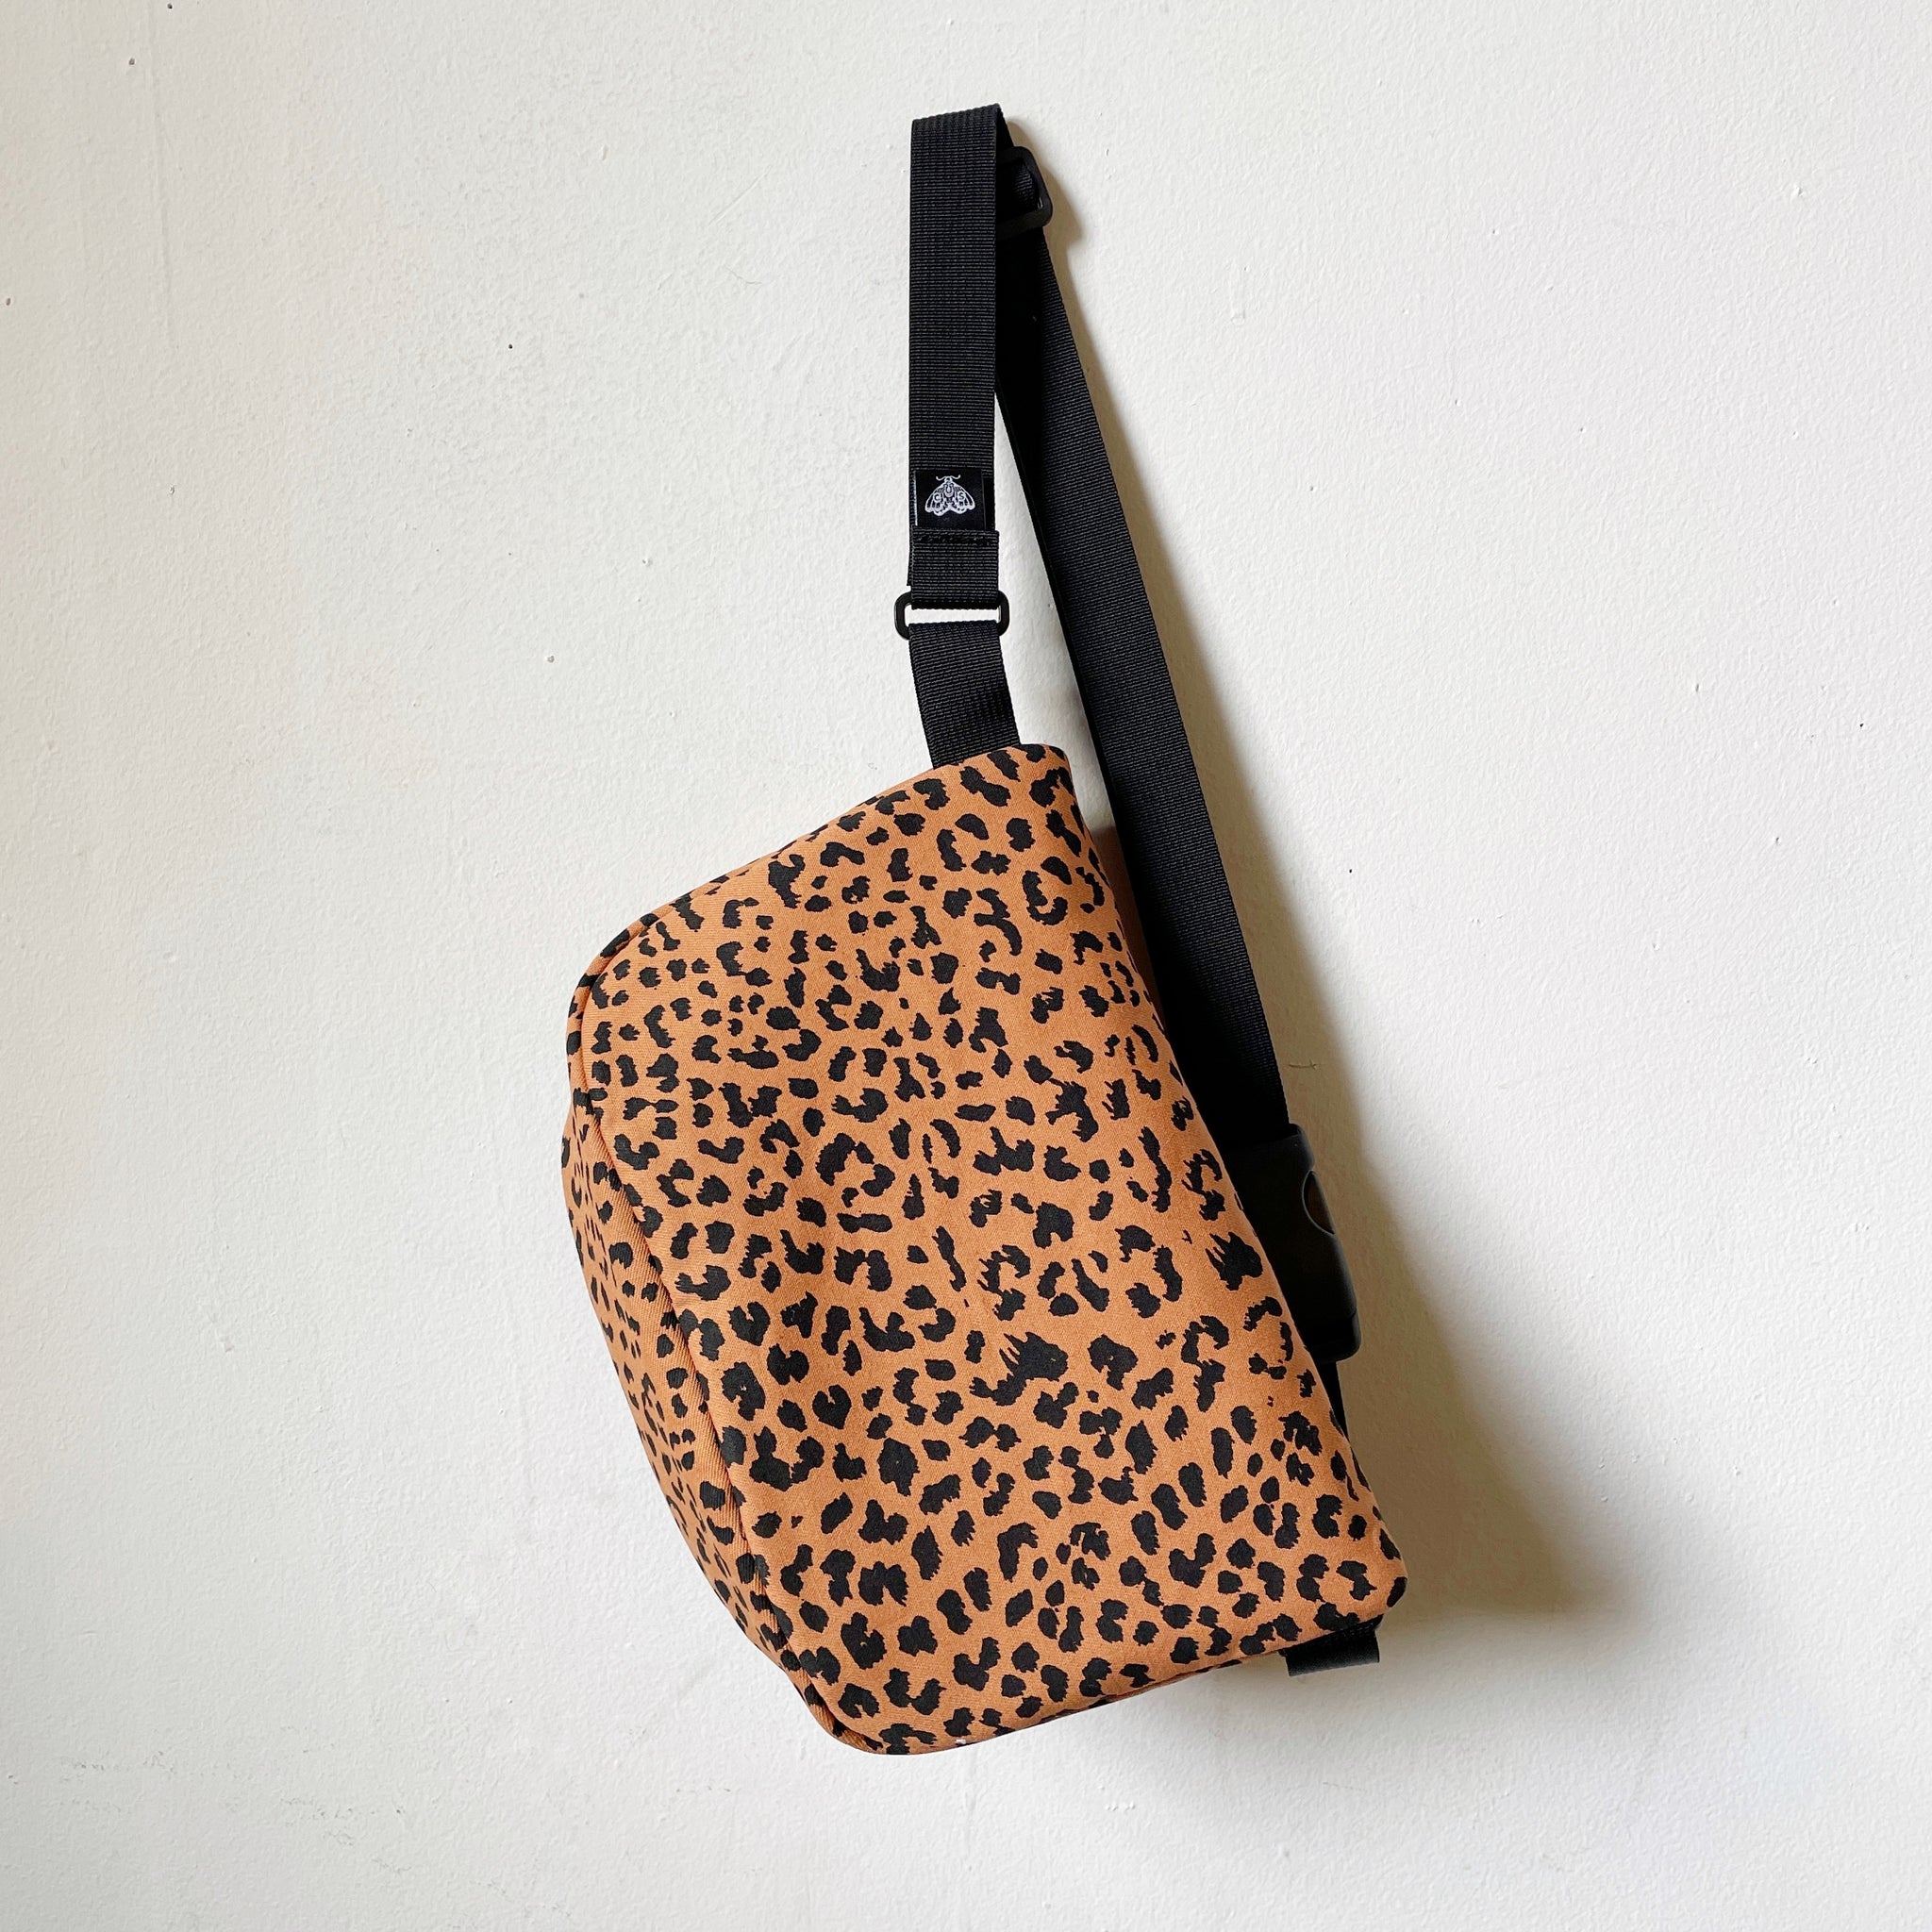  Mzjeaziany Sling Bag for Women Leopard Print Chest Bag